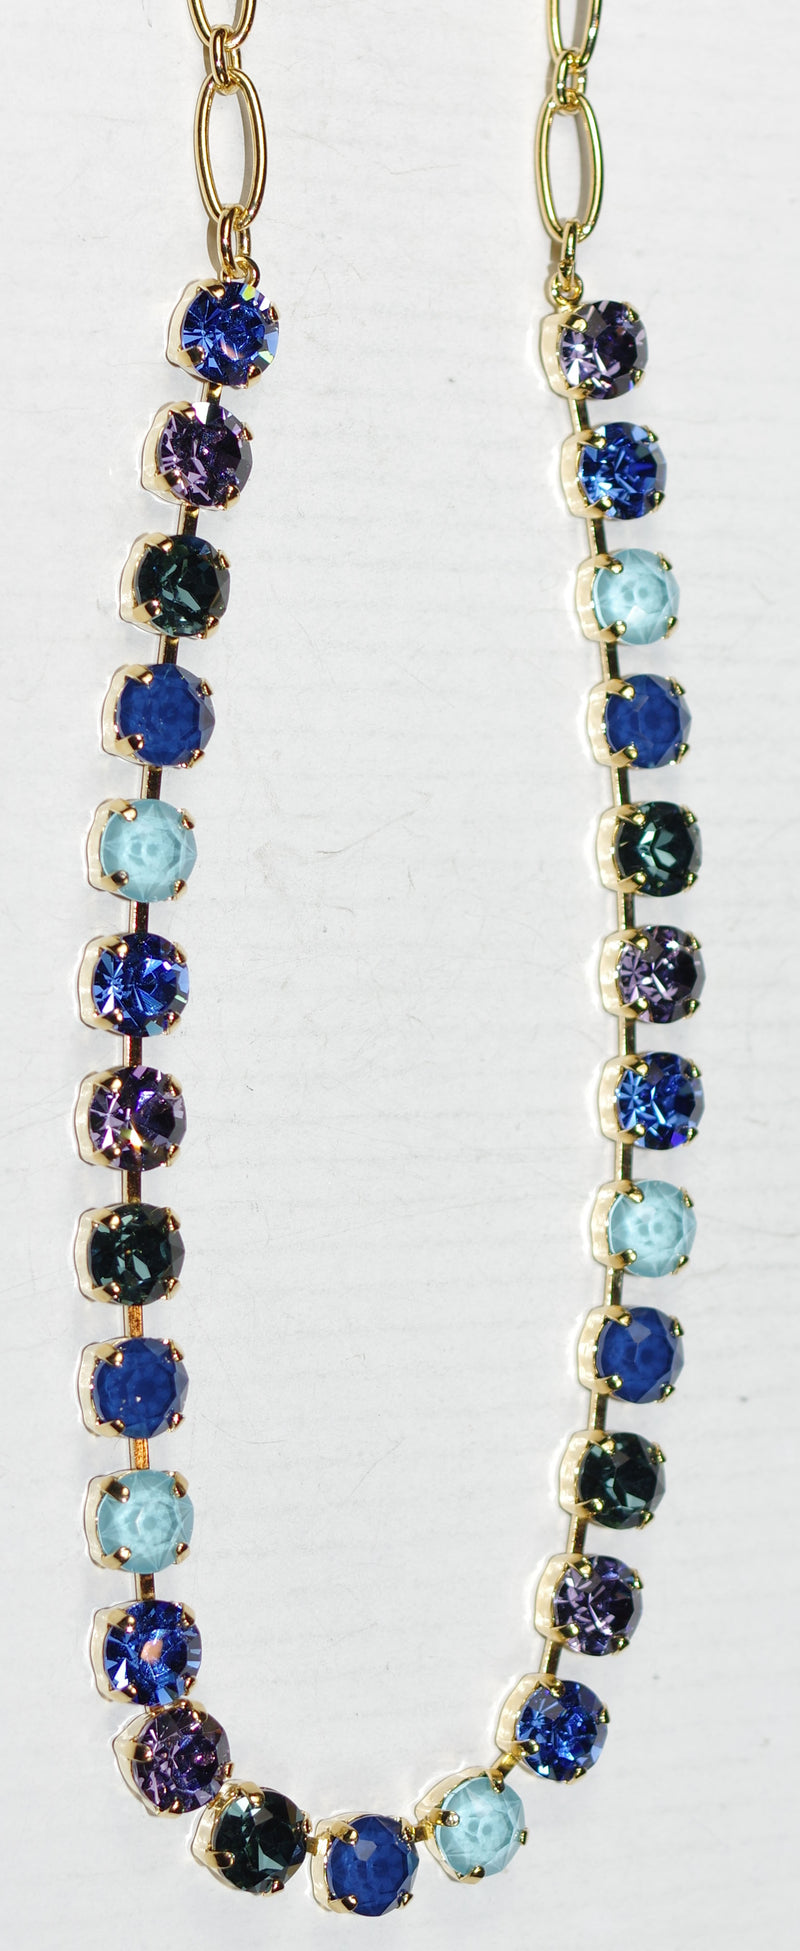 MARIANA NECKLACE ELECTRIC BLUE BETTE: blue, purple, teal stones in yellow gold setting, 17" adjustable chain